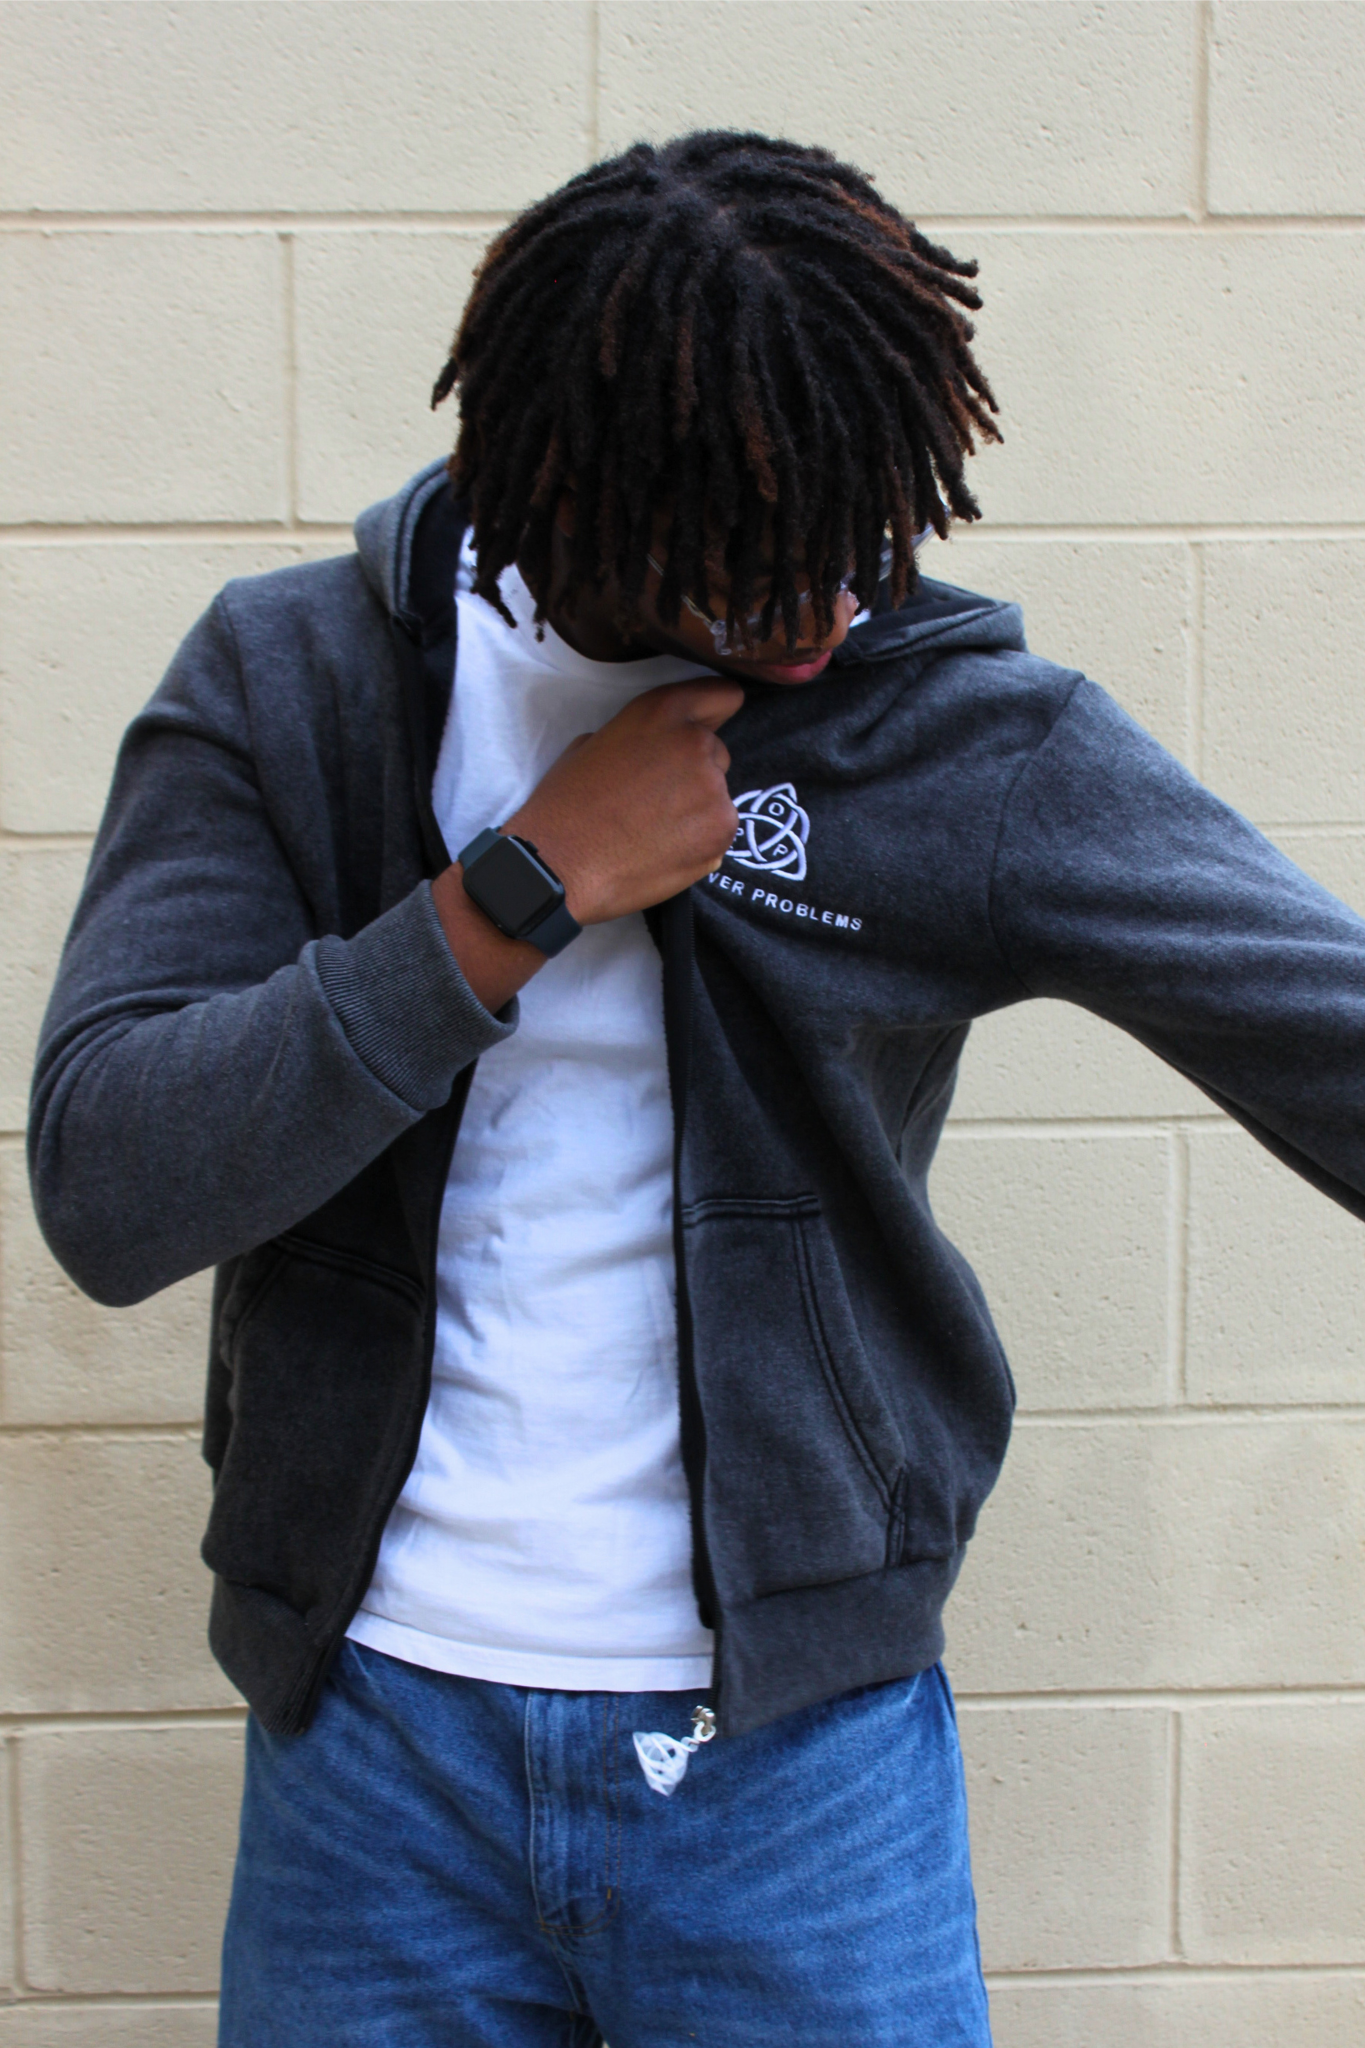 *PRE ORDER* "PeaceOverProblems" (Charcoal Black) Zip-Up Hoodie (TRUE TO SIZE)